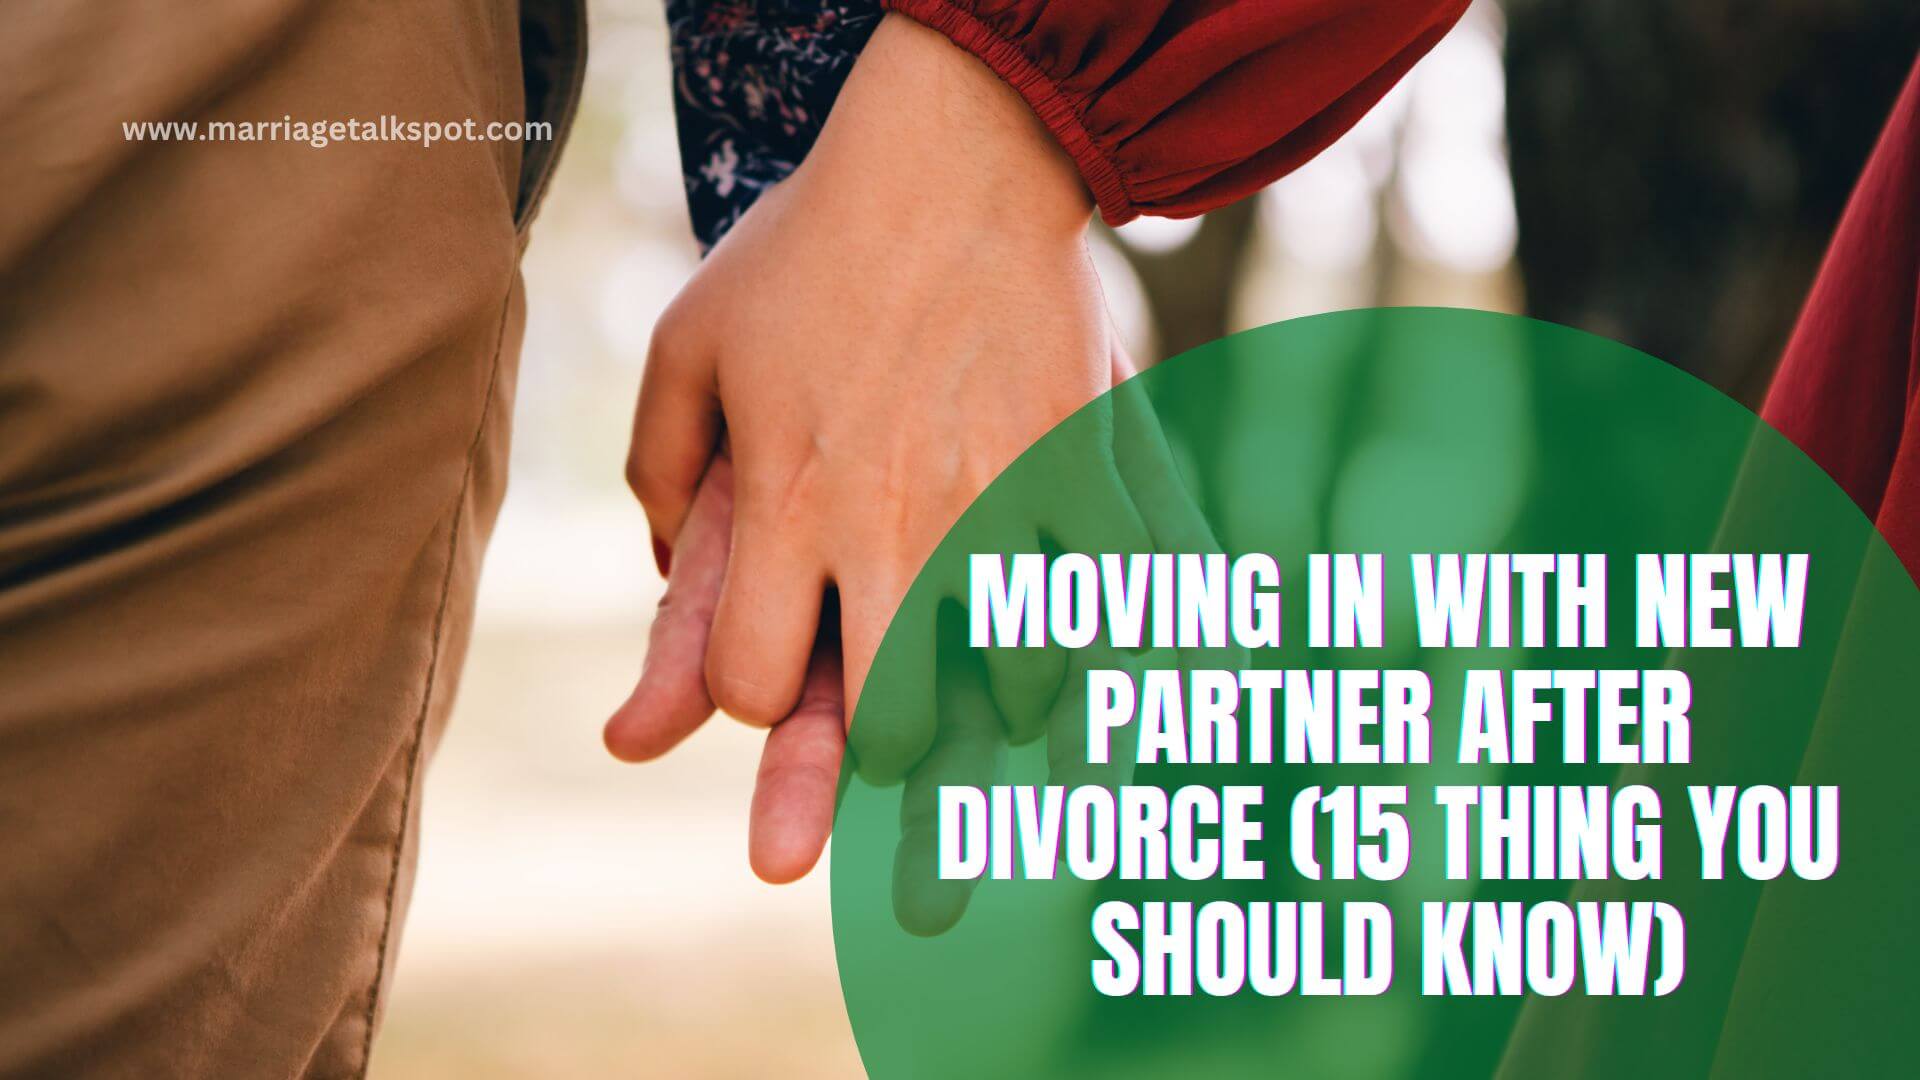 MOVING IN WITH NEW PARTNER AFTER DIVORCE (15 THING YOU SHOULD KNOW)